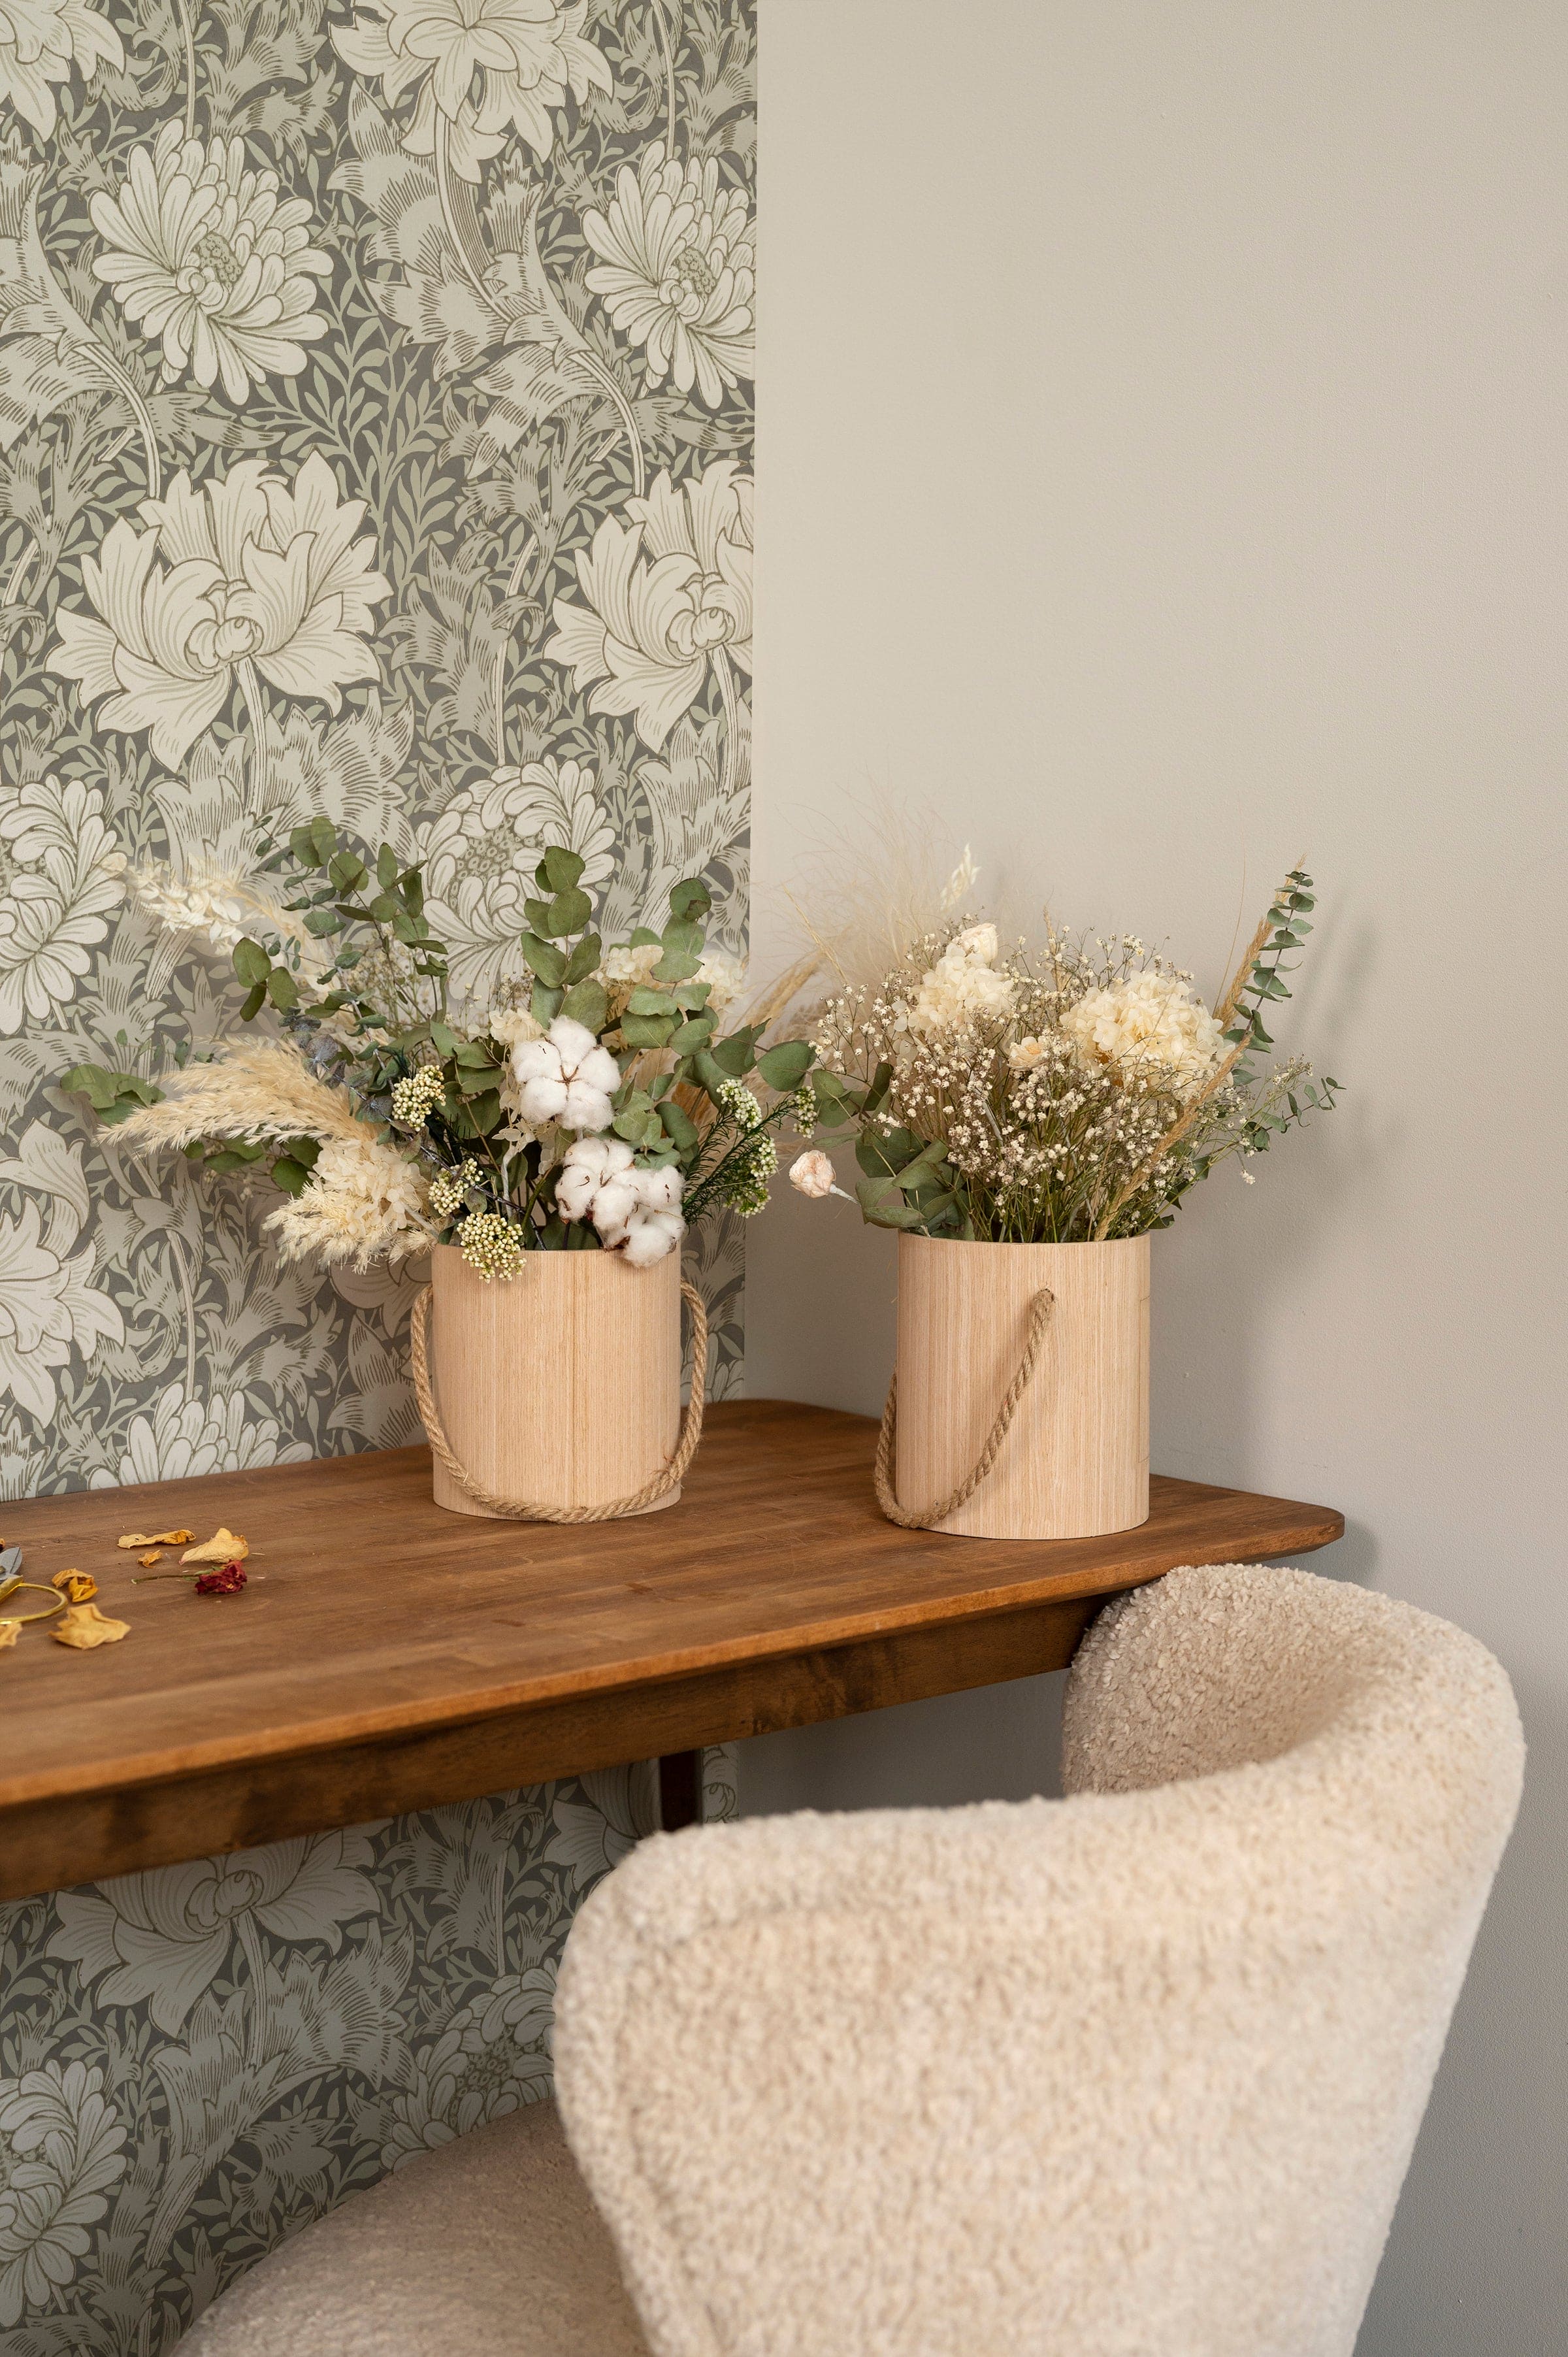 A cozy interior corner featuring the Entwined Elegance Wallpaper with a vintage floral pattern in grayscale. Two natural wood vases with dried white flowers sit atop a wooden shelf, adding a touch of rustic charm against the sophisticated backdrop.